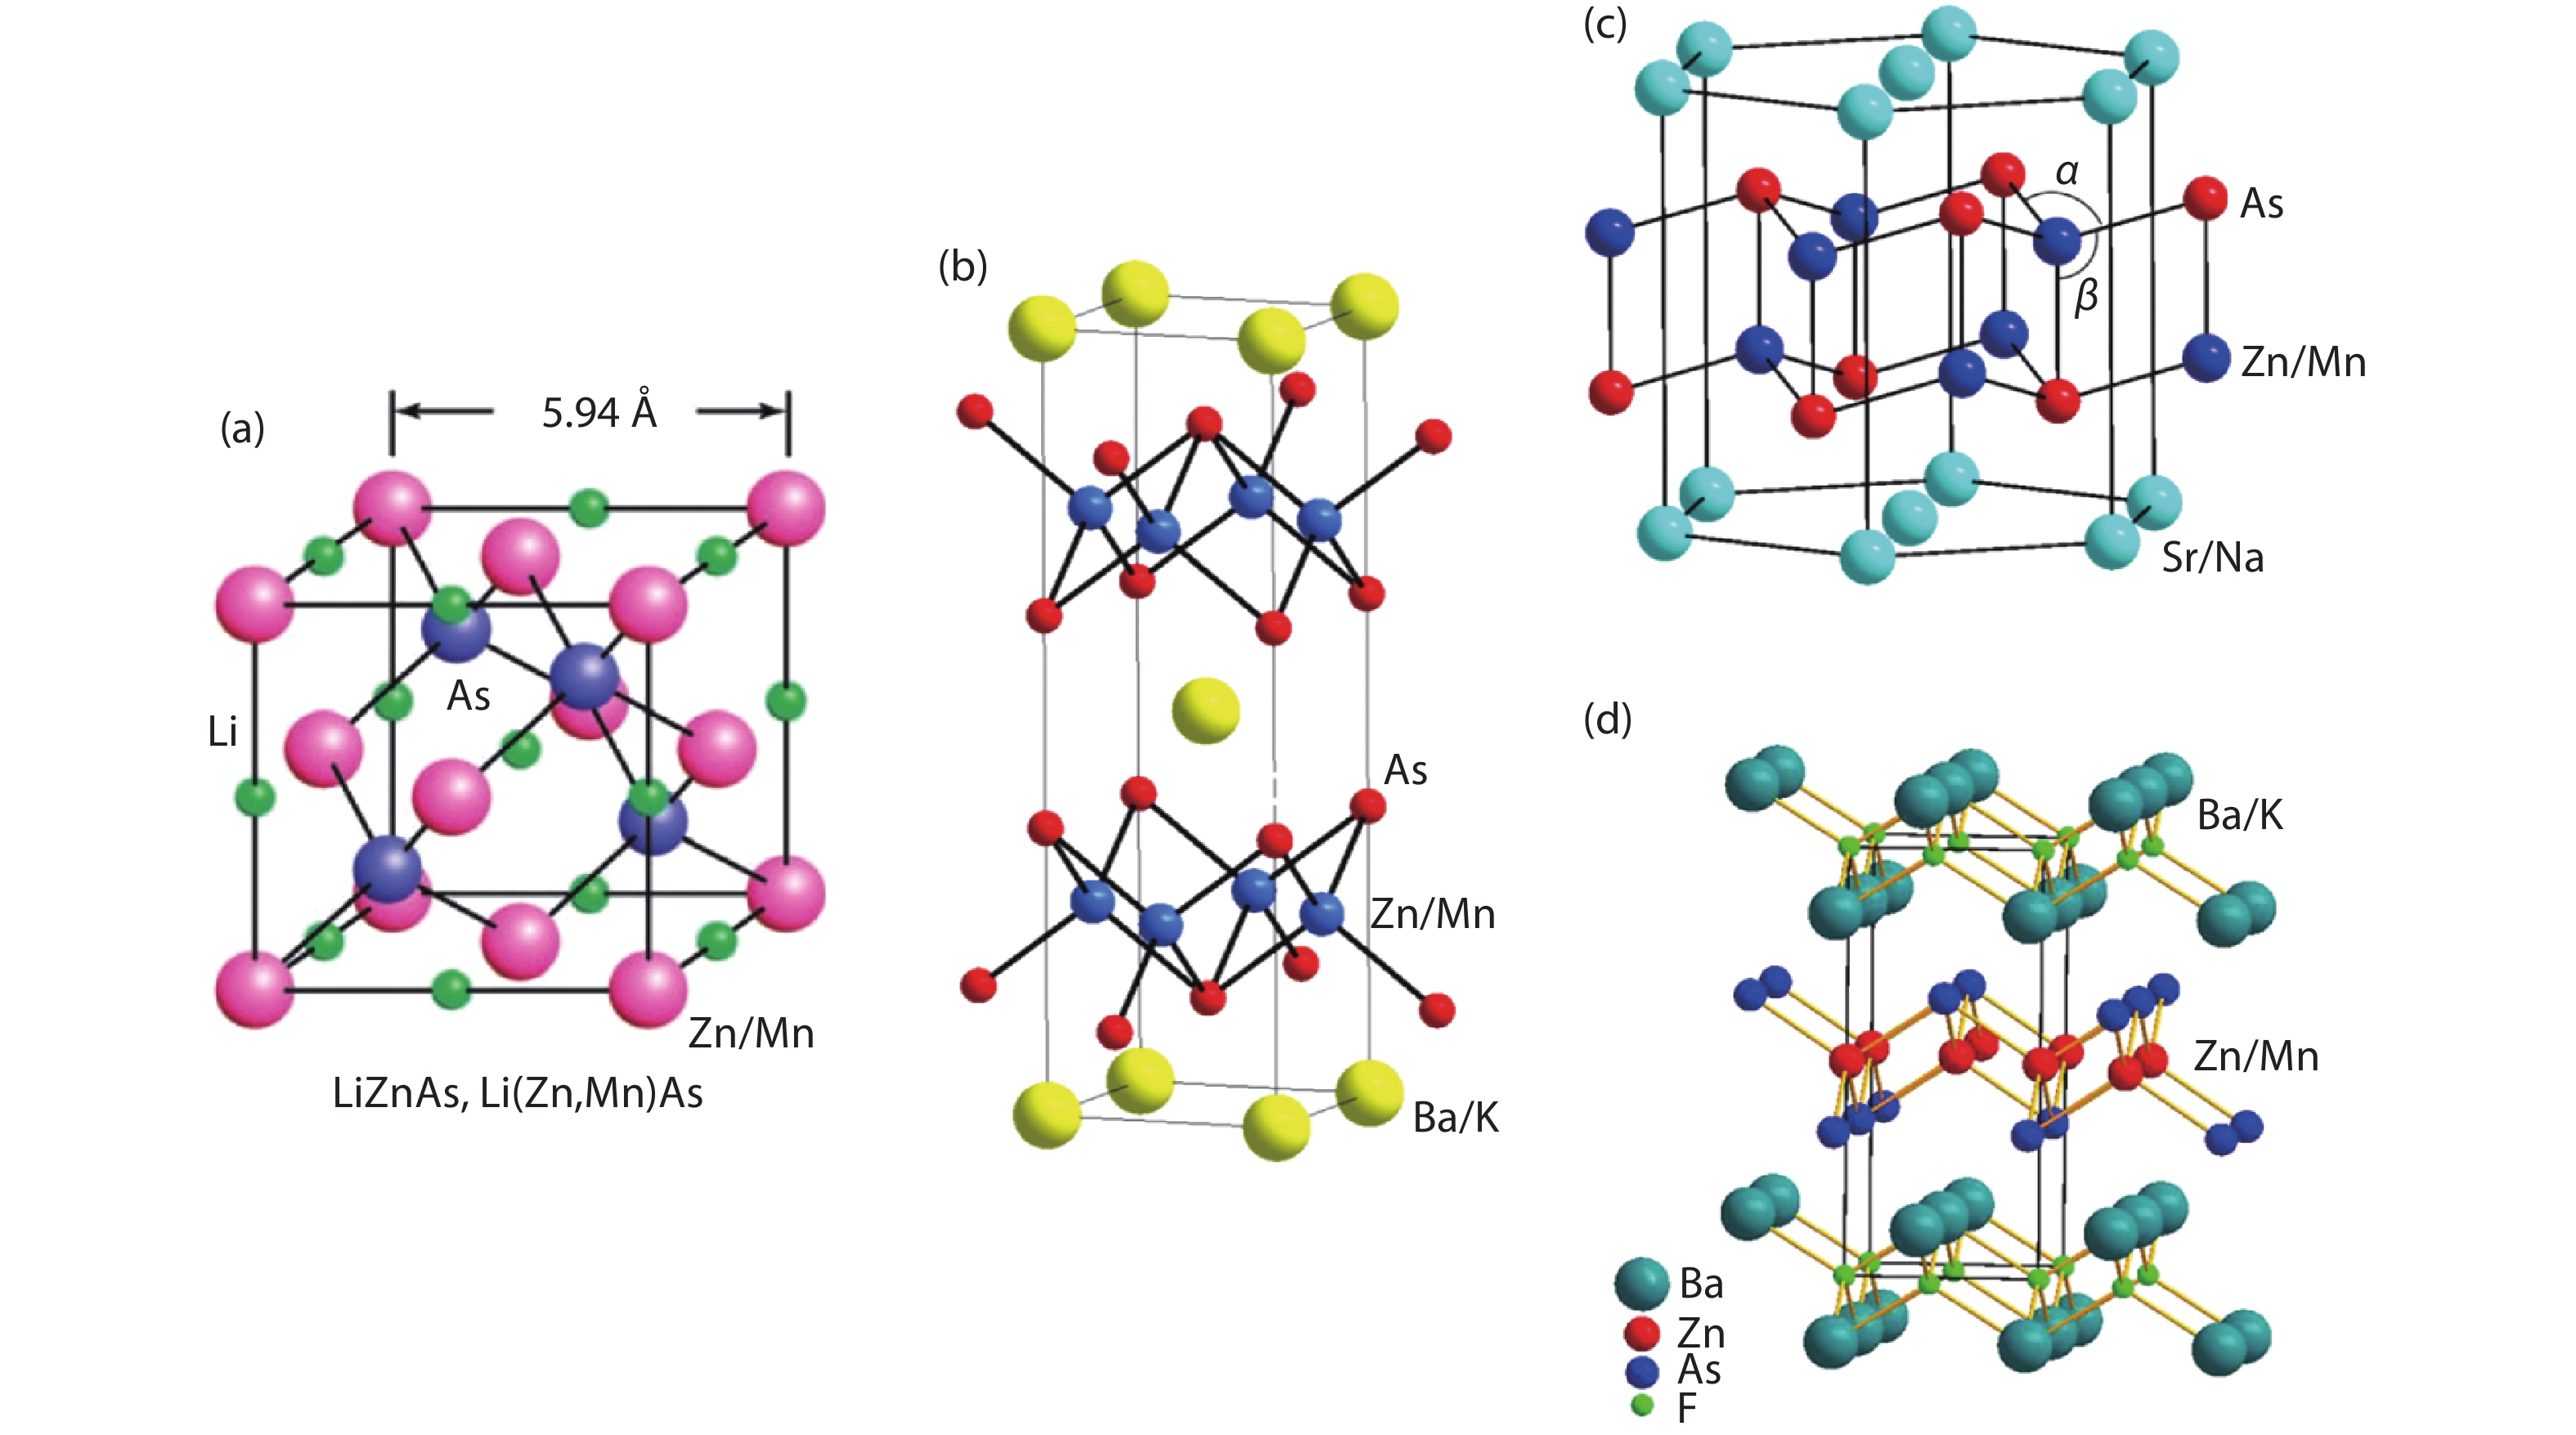 (Color online) The crystal structure of (a) “111” Li(Zn,Mn)As with zinc blende structure, (b) “122” (Ba,K)(Zn,Mn)2As2 with ThCr2Si2 type structure, (c) (Sr,Na)(Zn,Mn)2As2 with CaAl2Si2 type structure, (d) “1111” (Ba,K)F(Zn,Mn)As with ZrCuSiAs structure. Adoped from Refs. [19, 20, 42, 47].